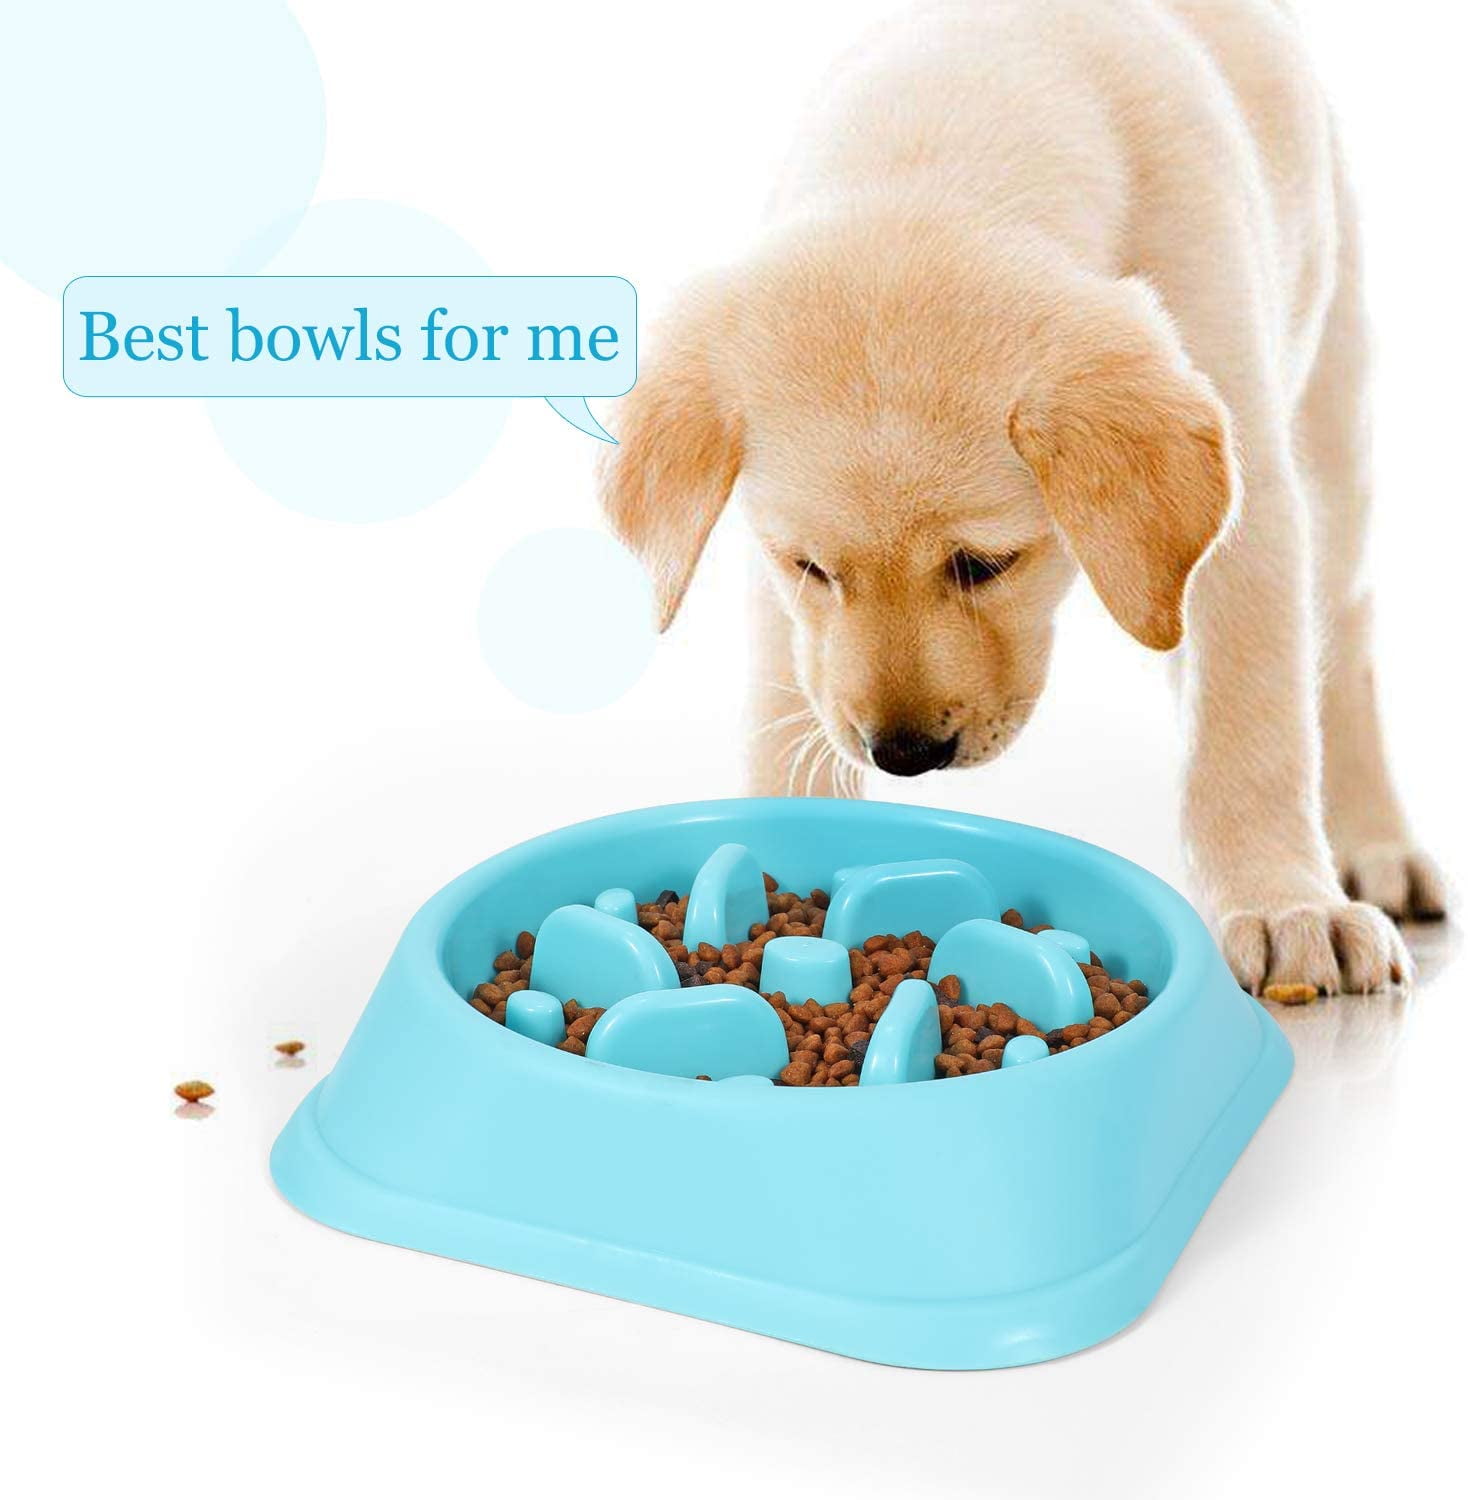 Aolove Slow Feeder Bowl Healthy Food Fun Anti-Choke Pet Bowls for Dog (One size, Green)